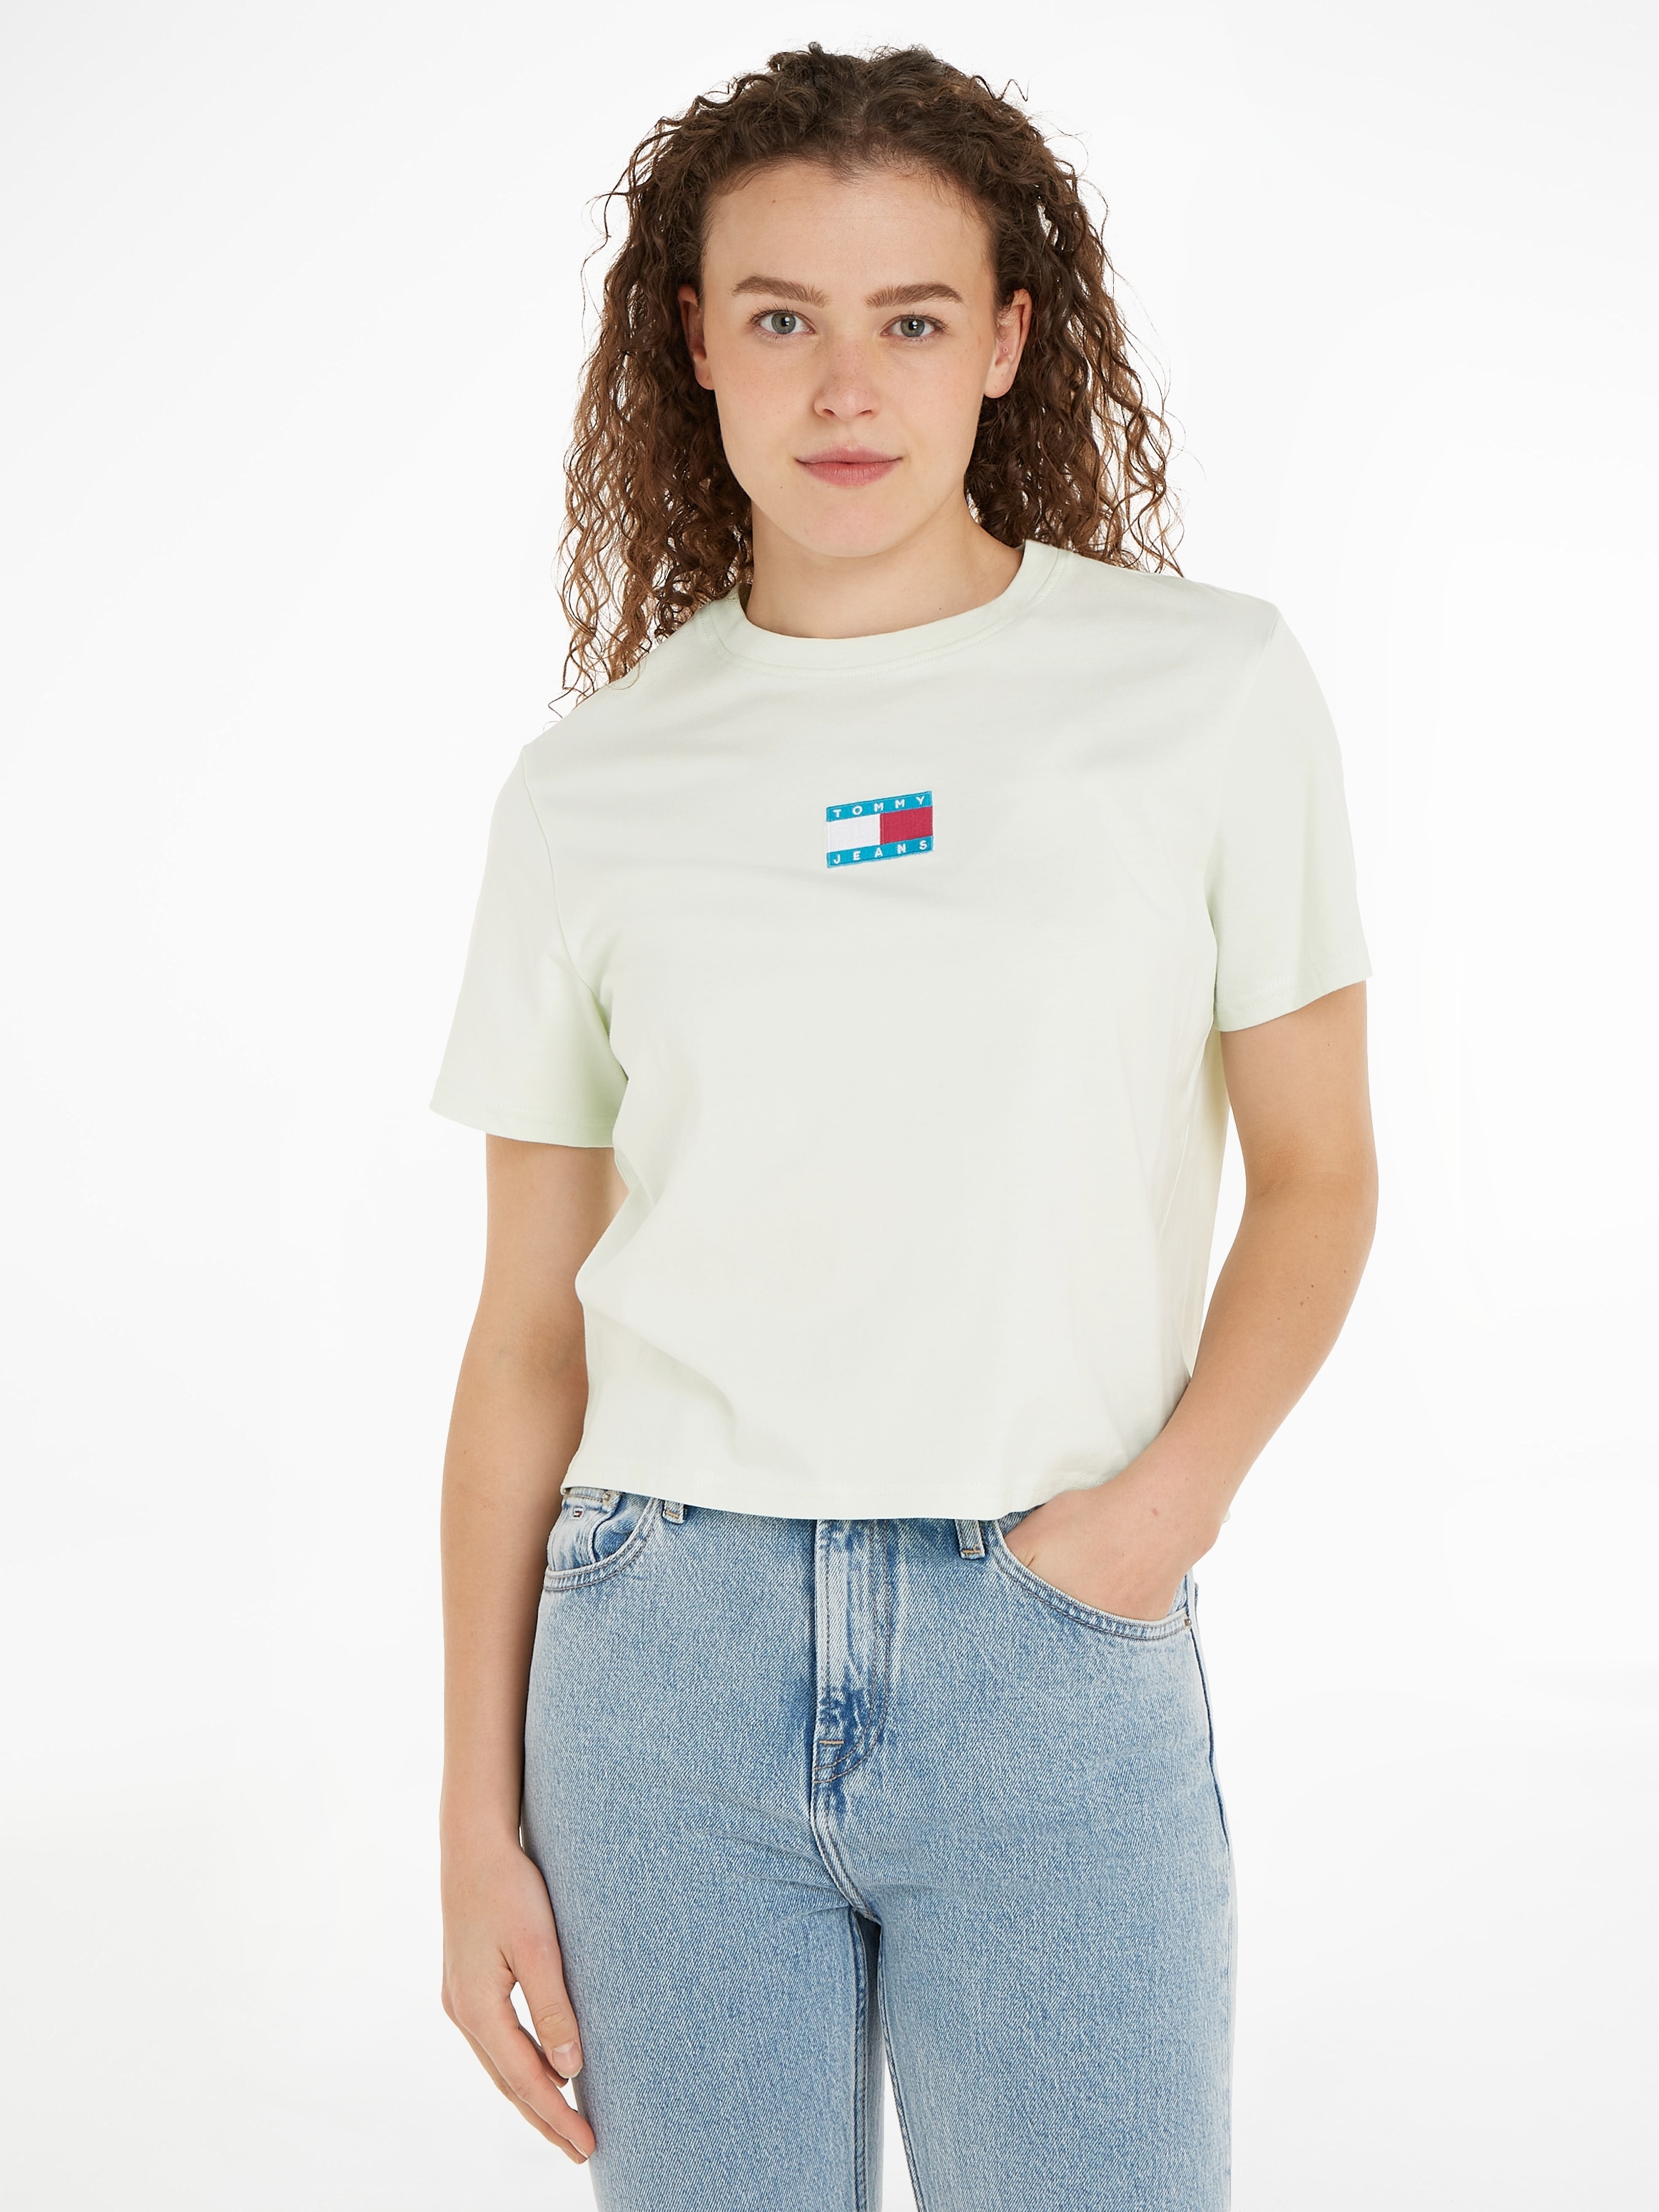 Tommy Jeans T-Shirt »TJW CLS POP BADGE TEE«, mit Tommy Jeans Logostickerei  kaufen | I'm walking